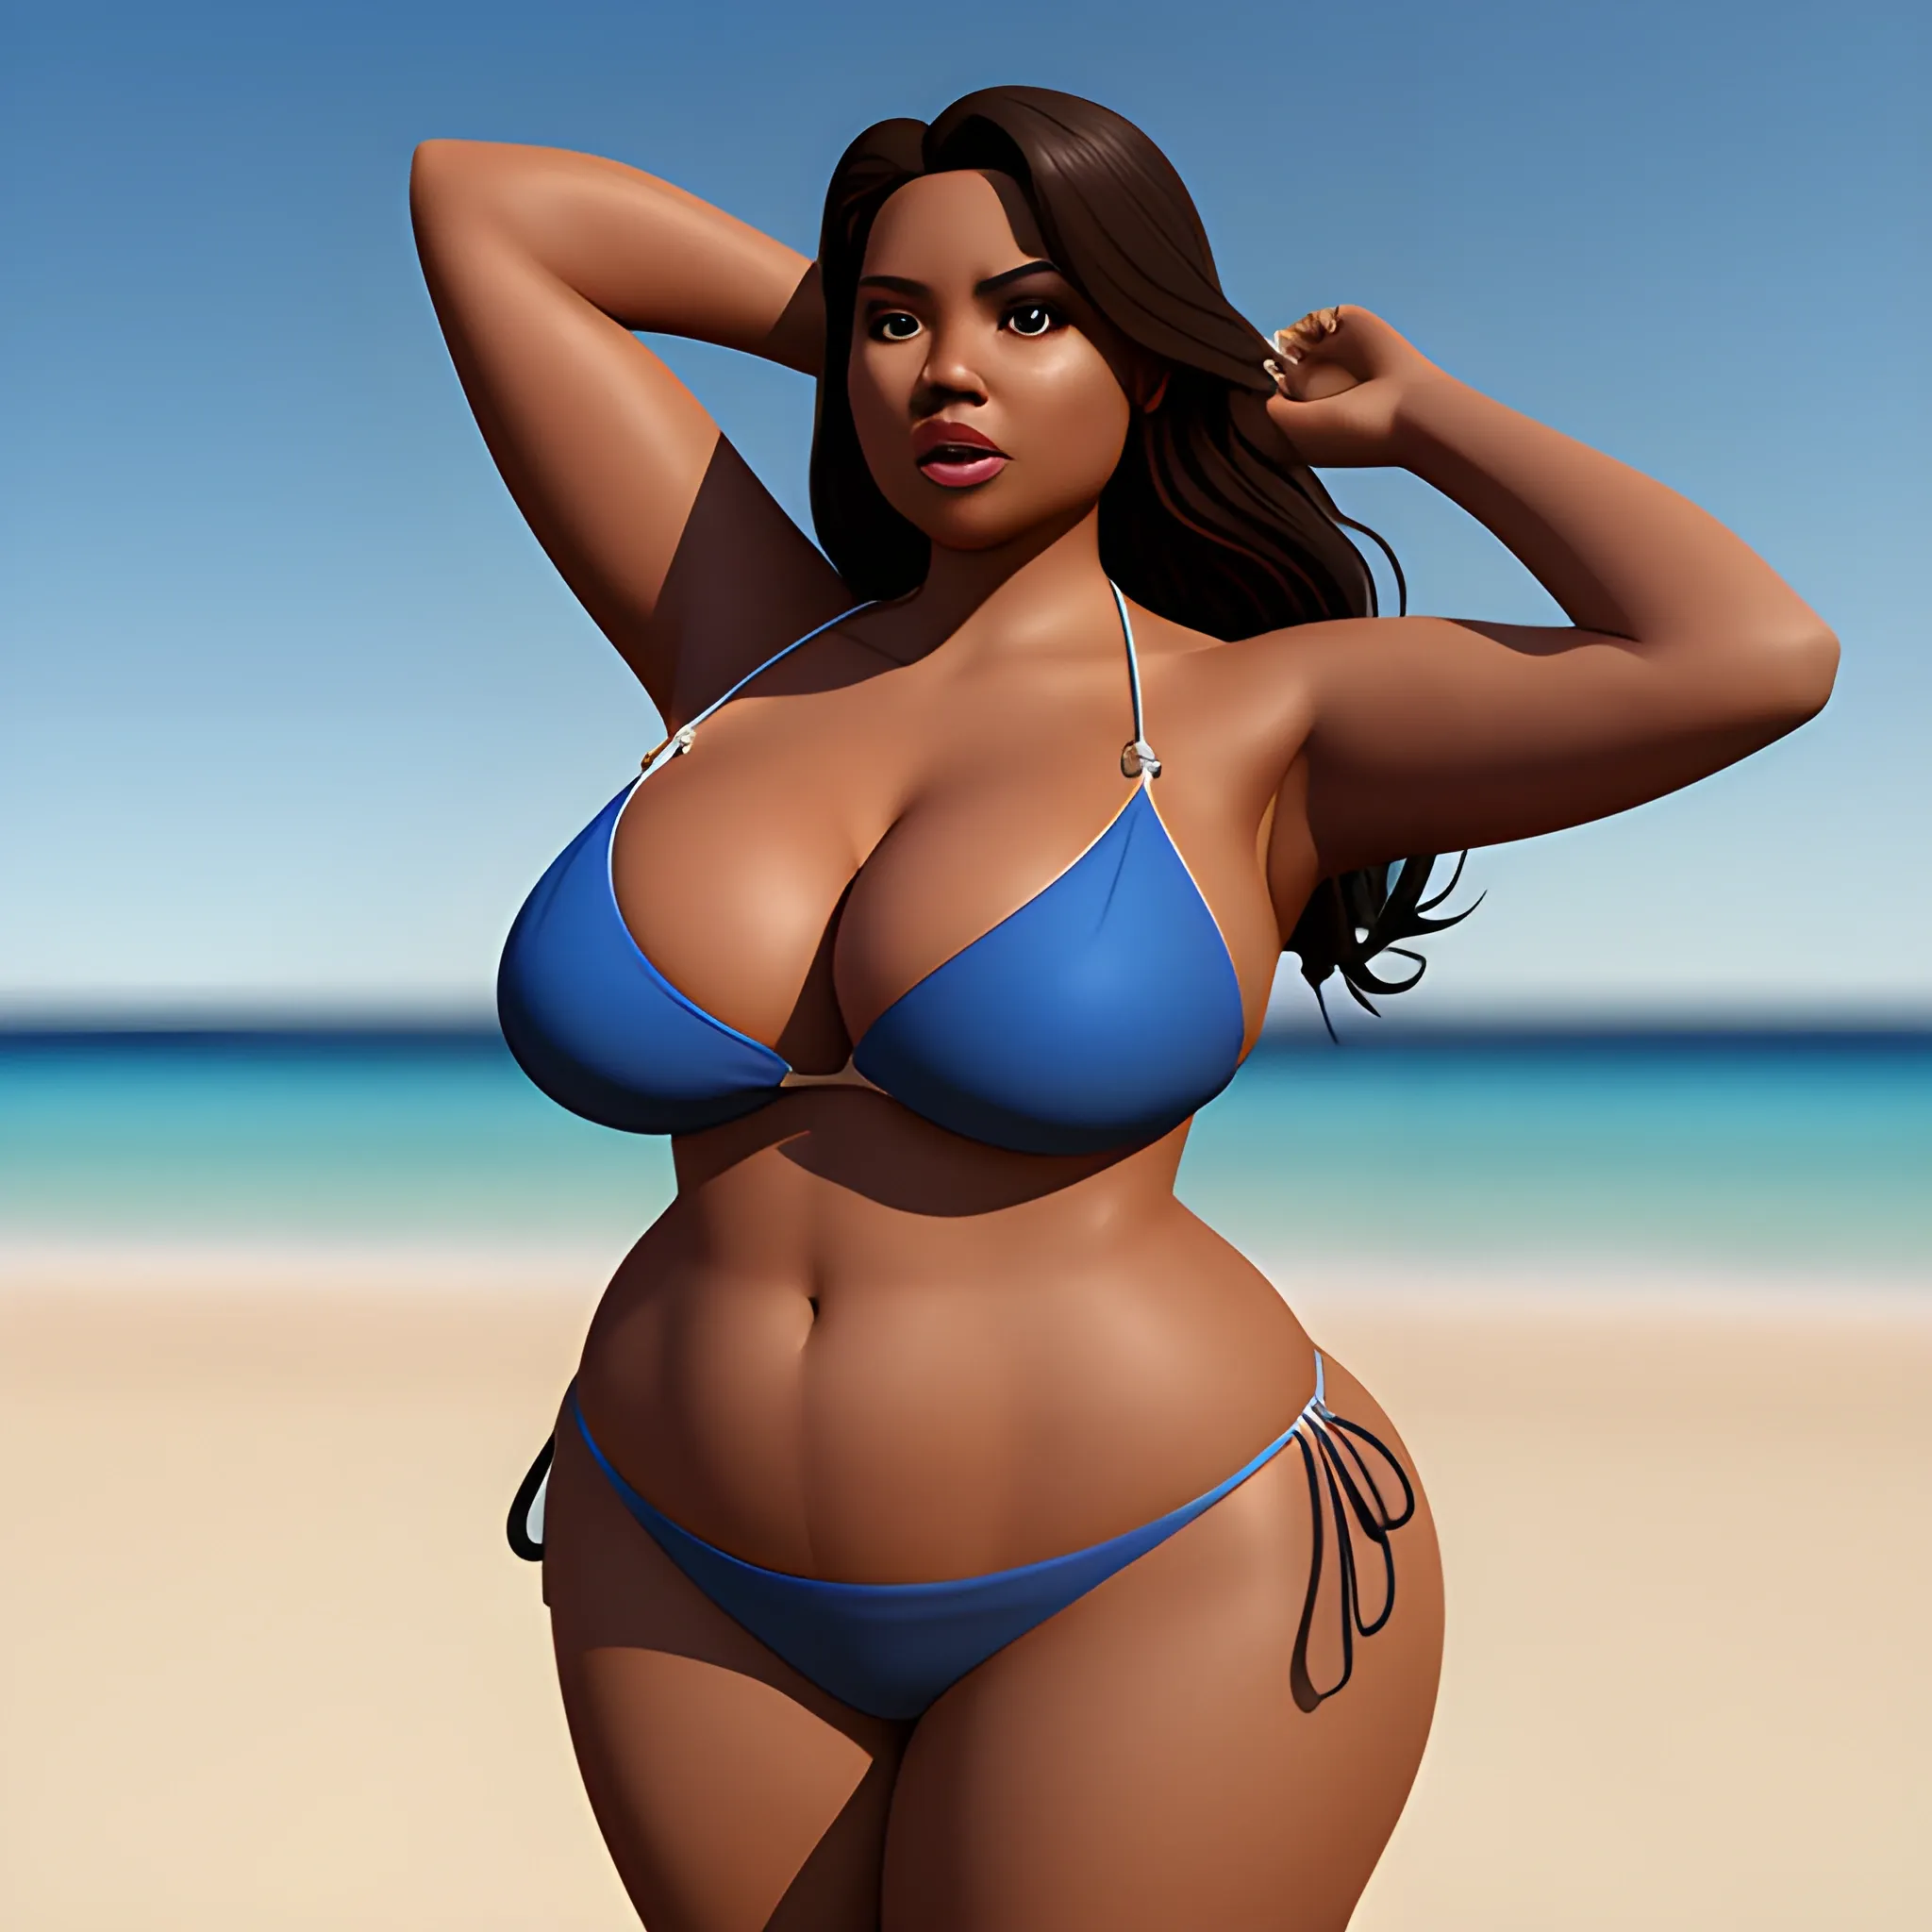 curvy woman with mixed skin in a luxury bikini standing up
, 3D